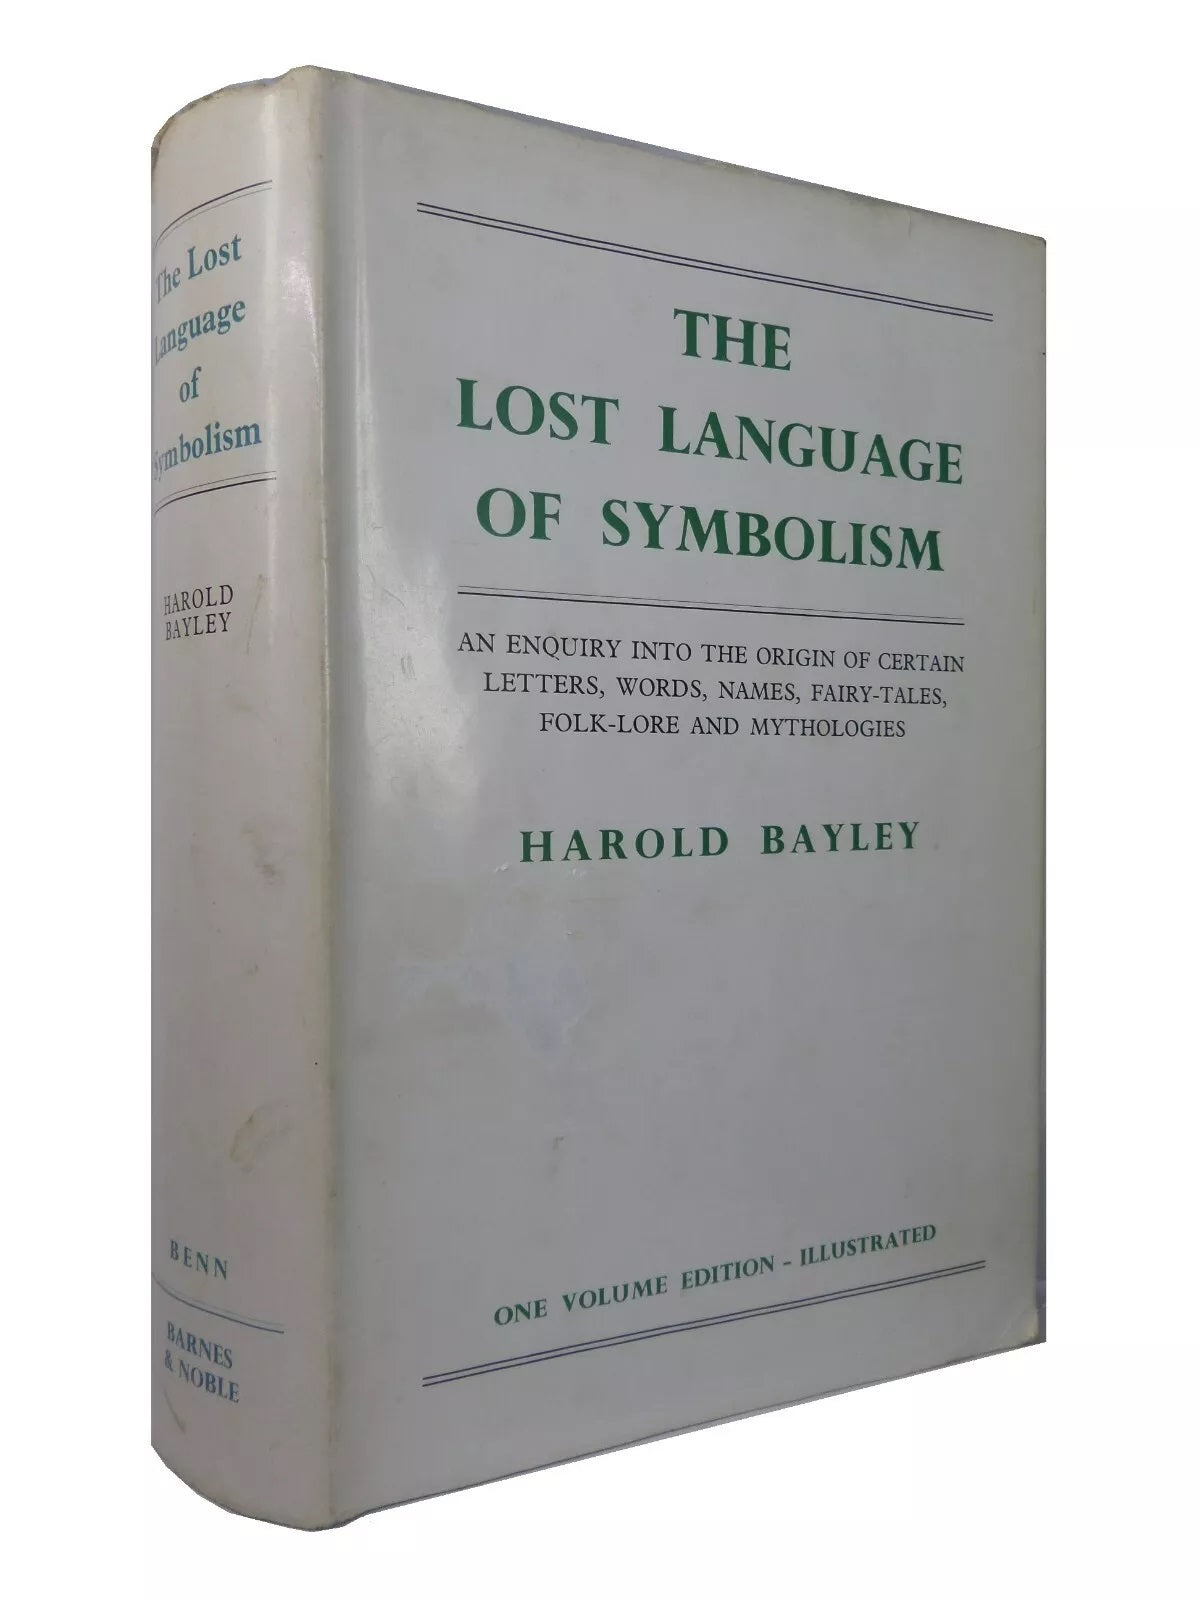 LOST LANGUAGE OF SYMBOLISM BY HAROLD BAYLEY 1968 HARDCOVER